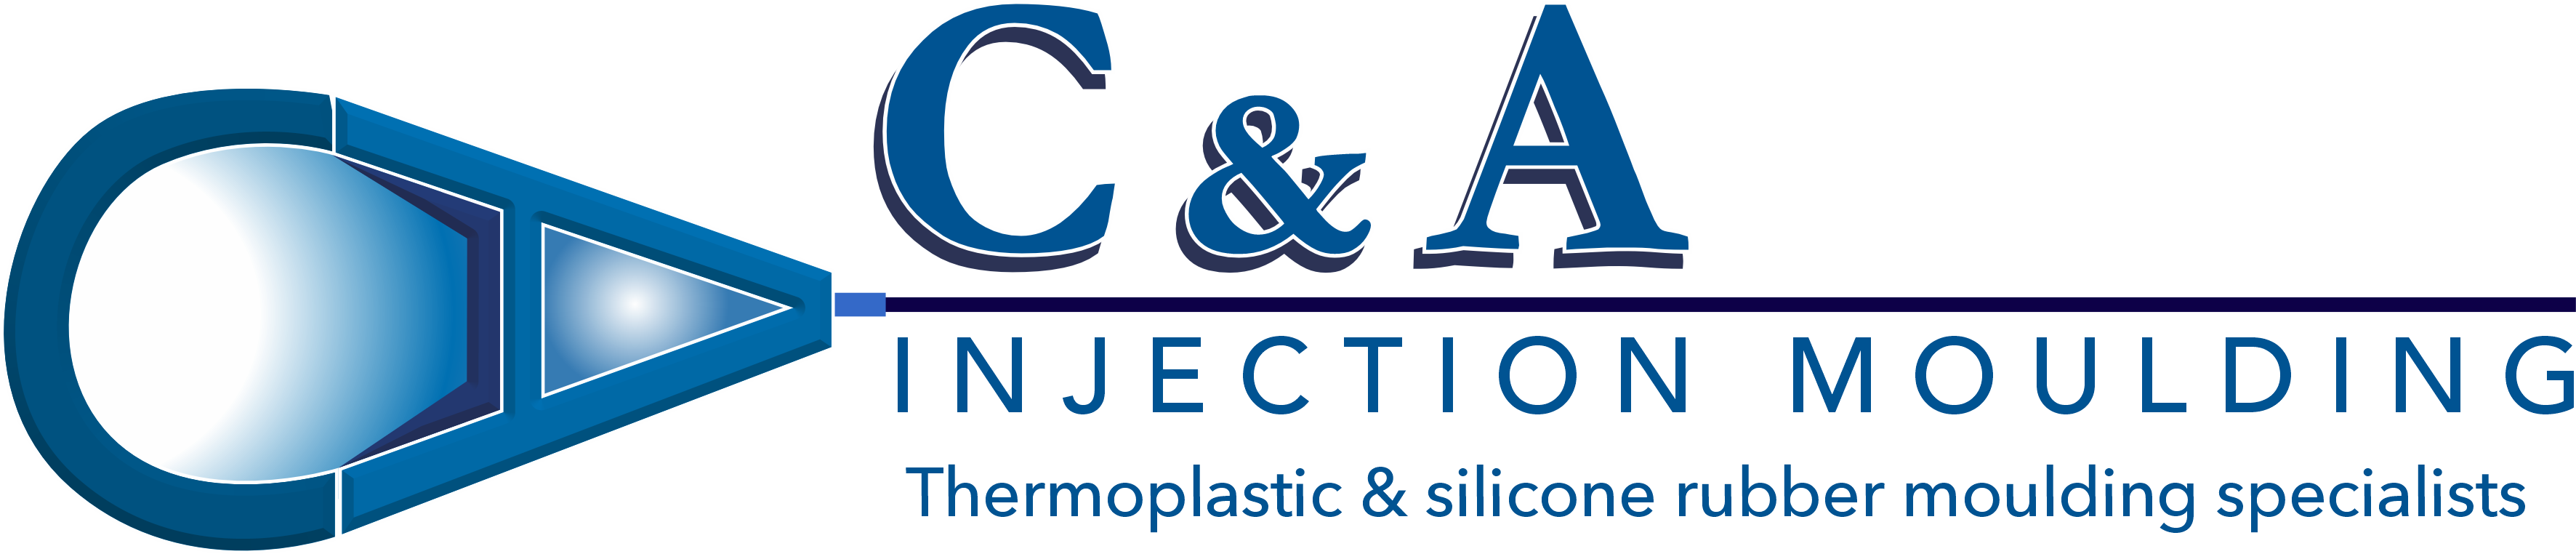 C and A Injection Moulding - Plastic and Silicone Moulding Specialists in the UK